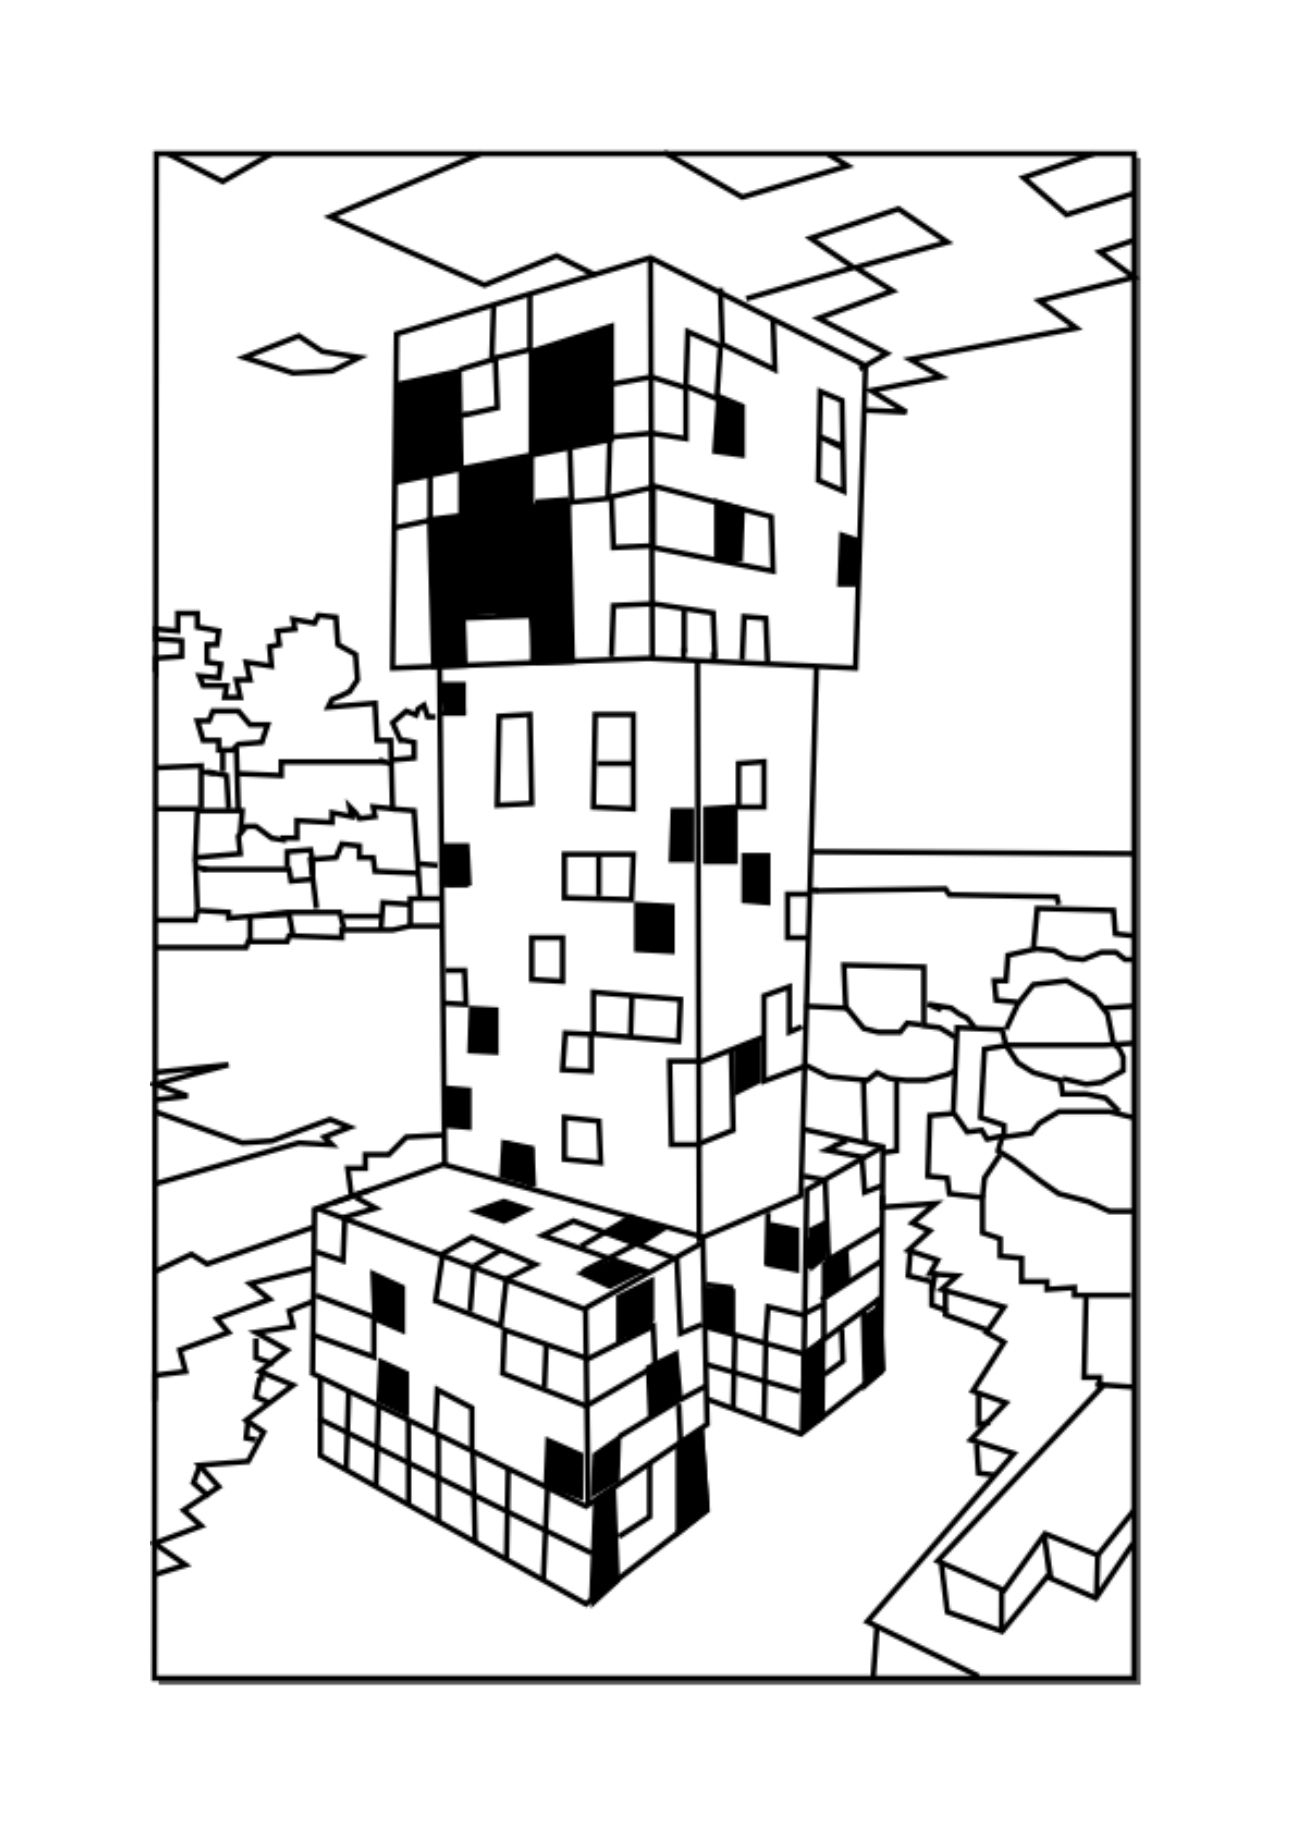 Creeper Coloring Page at GetColorings.com | Free printable colorings